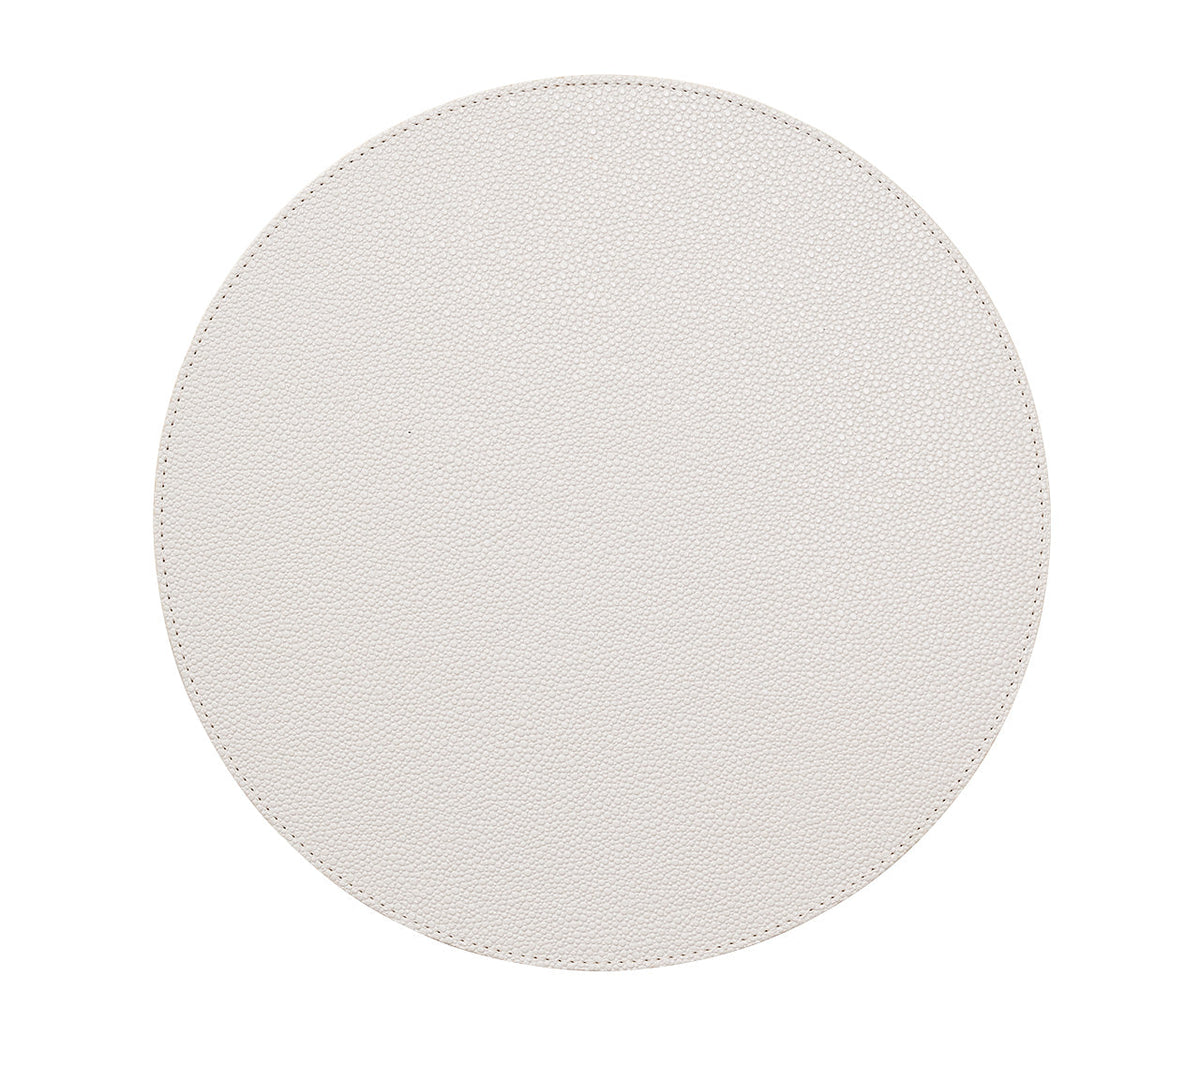 Pebble Placemat in White, Set of 4